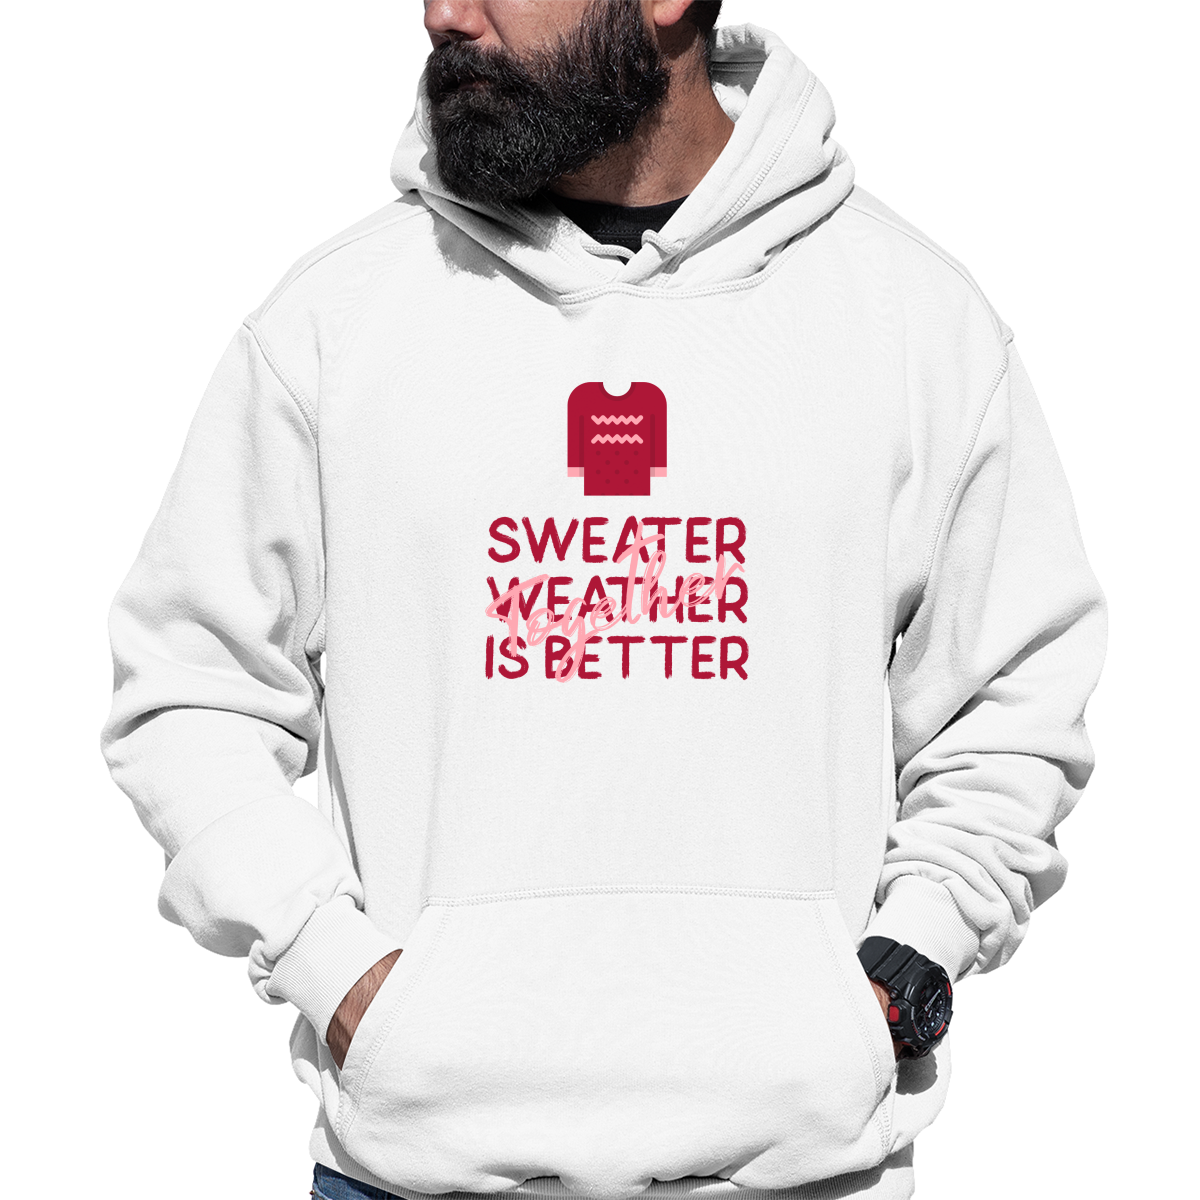 Sweather Weather is Better Together Unisex Hoodie | White